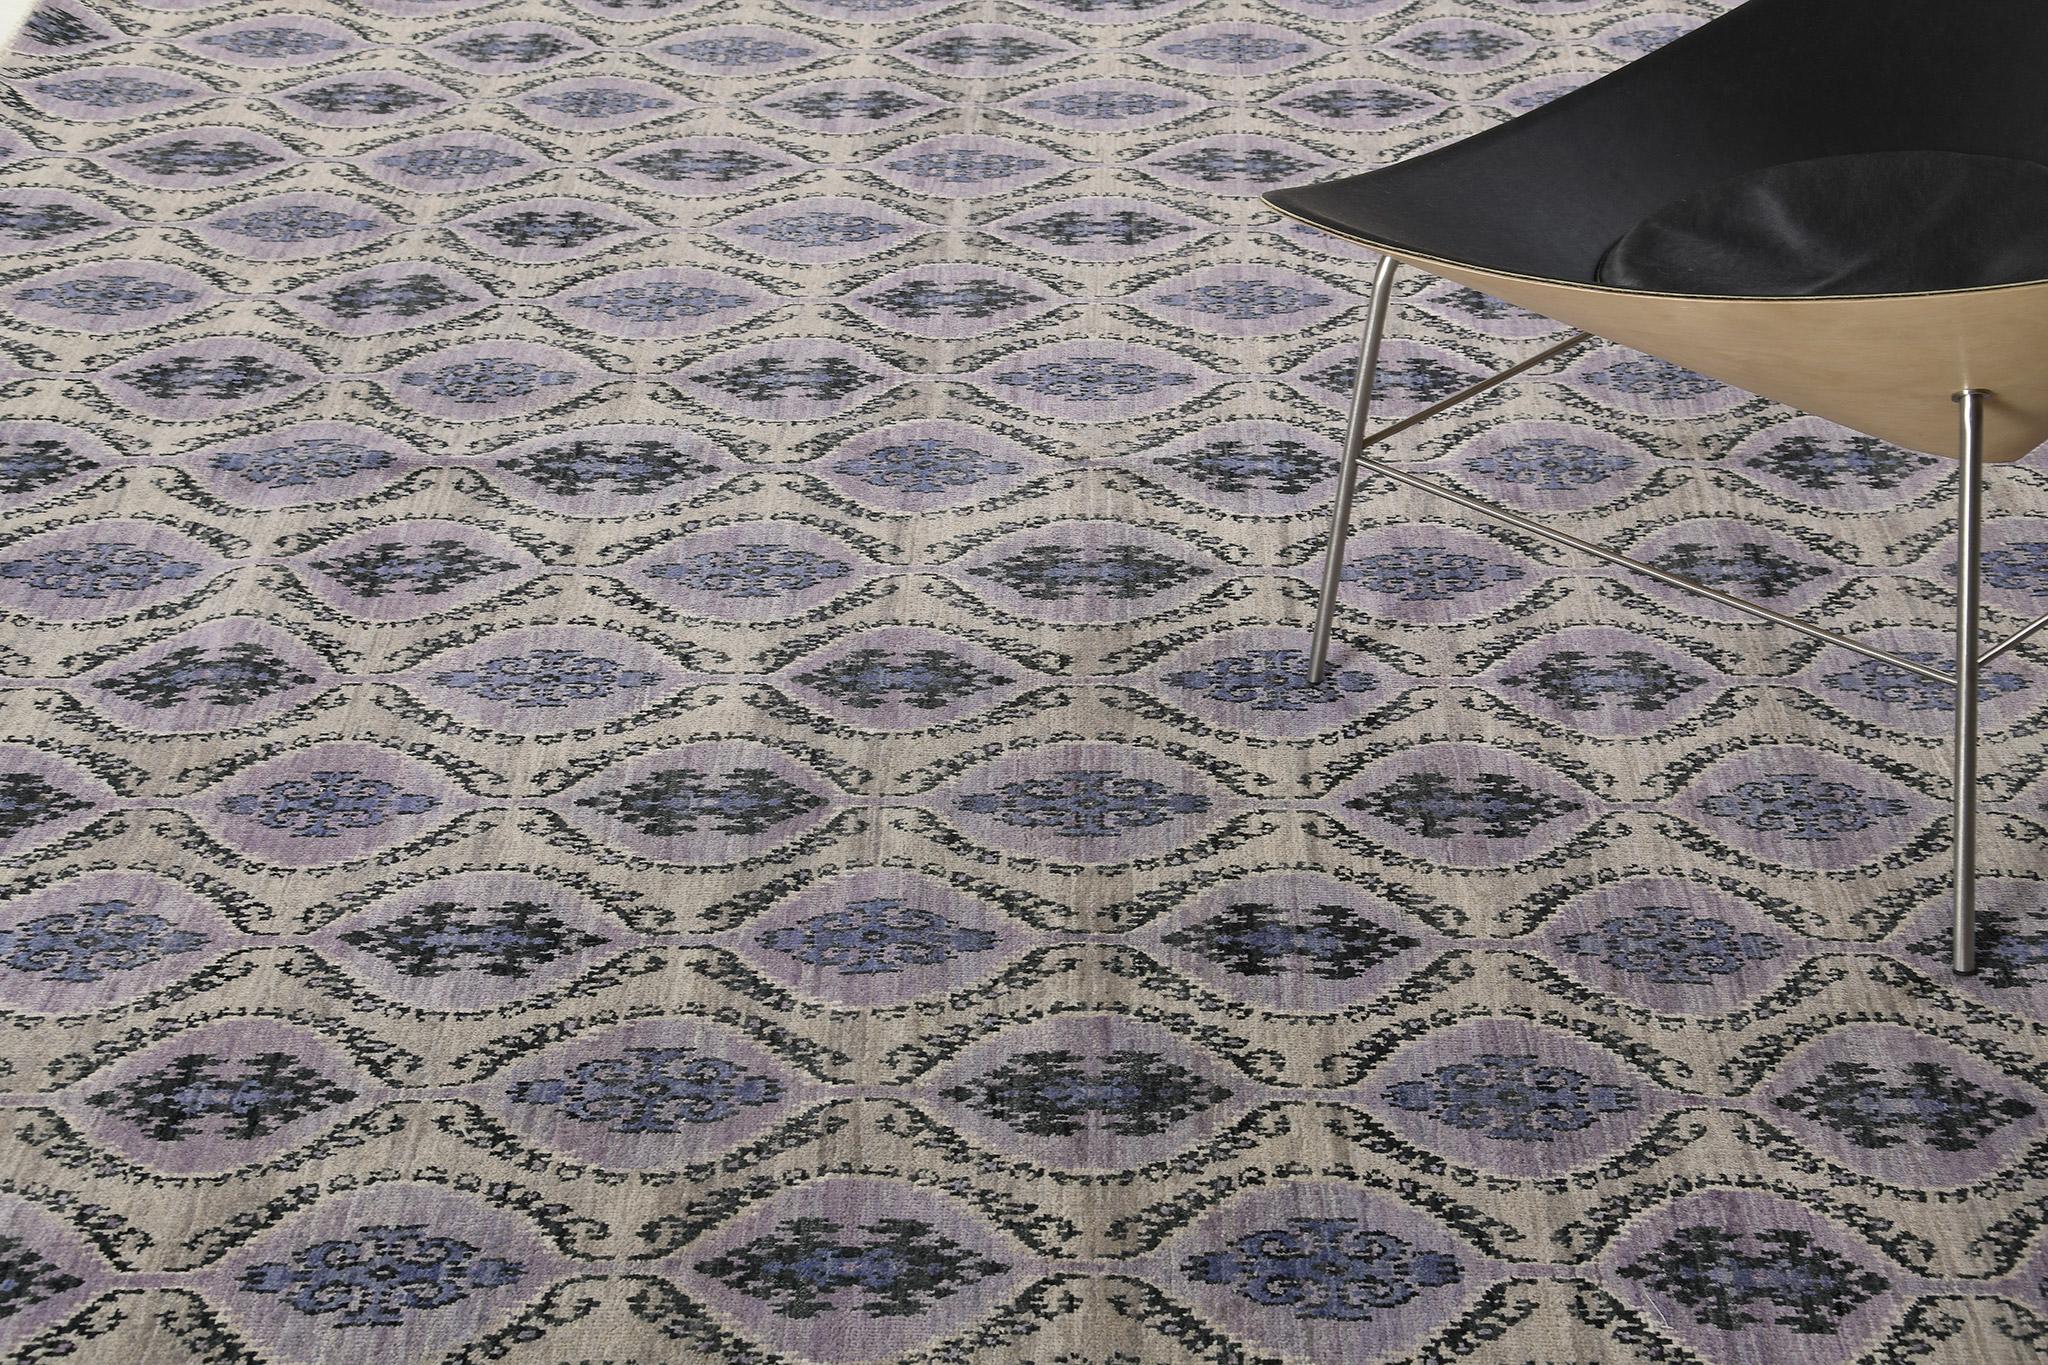 Dantelle is a transitional design weaving traditional diamond motifs in a modern-day lattice pattern. Beautiful blues and hues of gray complement one another to create a timely rug. This piece will elevate and bring character to any room.

Rug